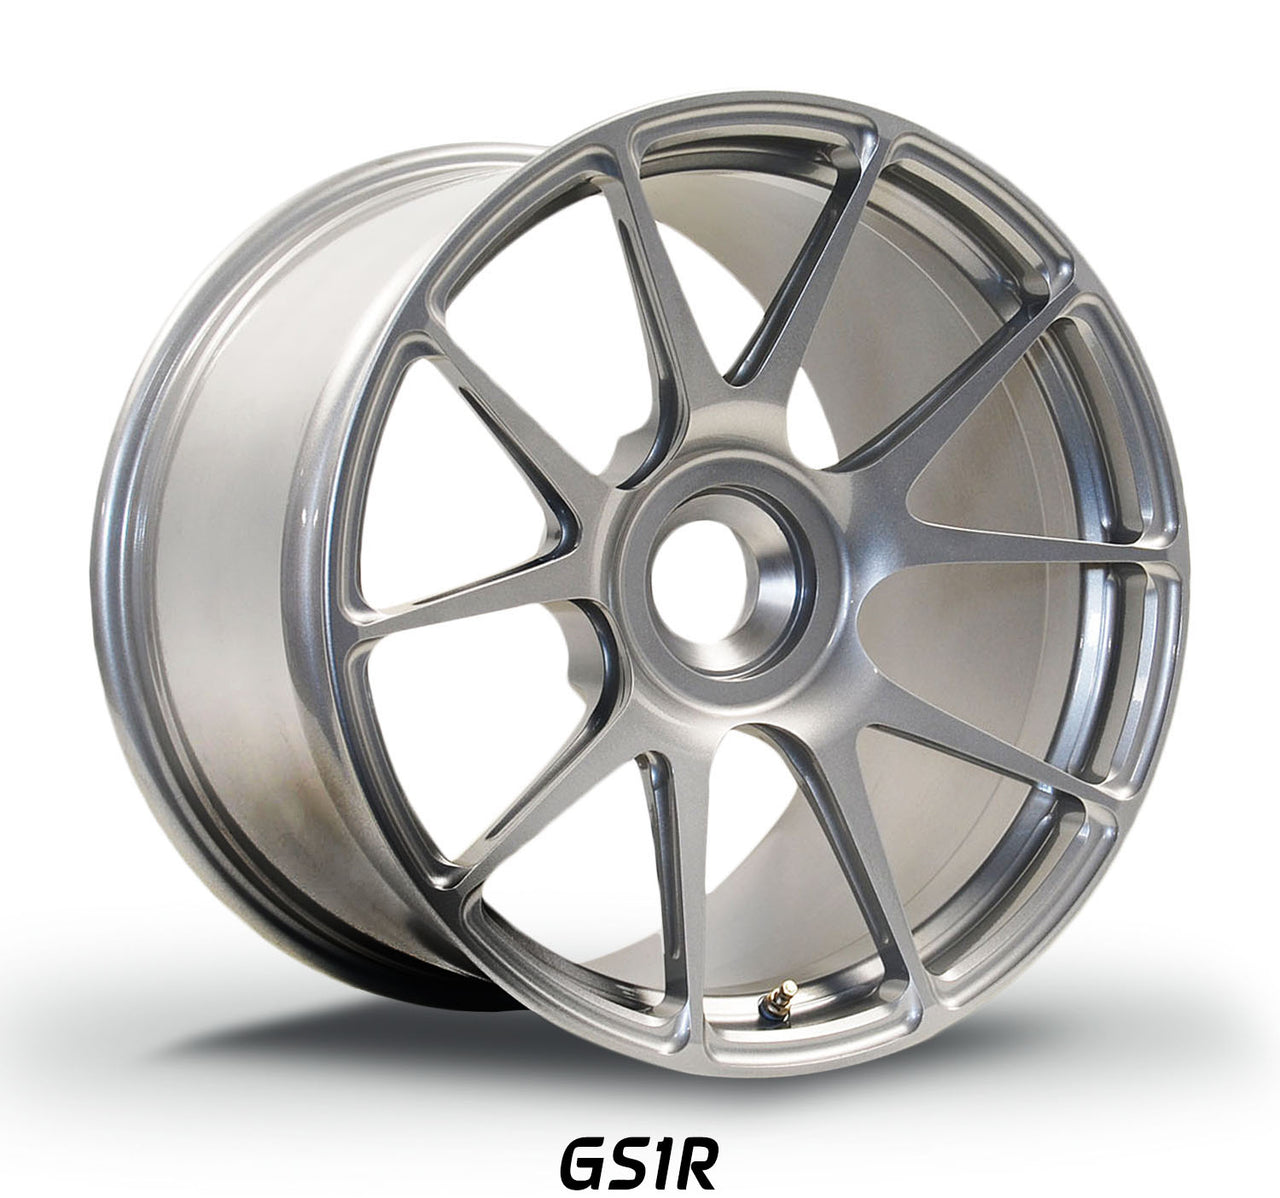 Hyper Silver Forgeline GS1R center lock for Porsche 991 GT3 RS best lightweight wheels for HPDE and Time Trials